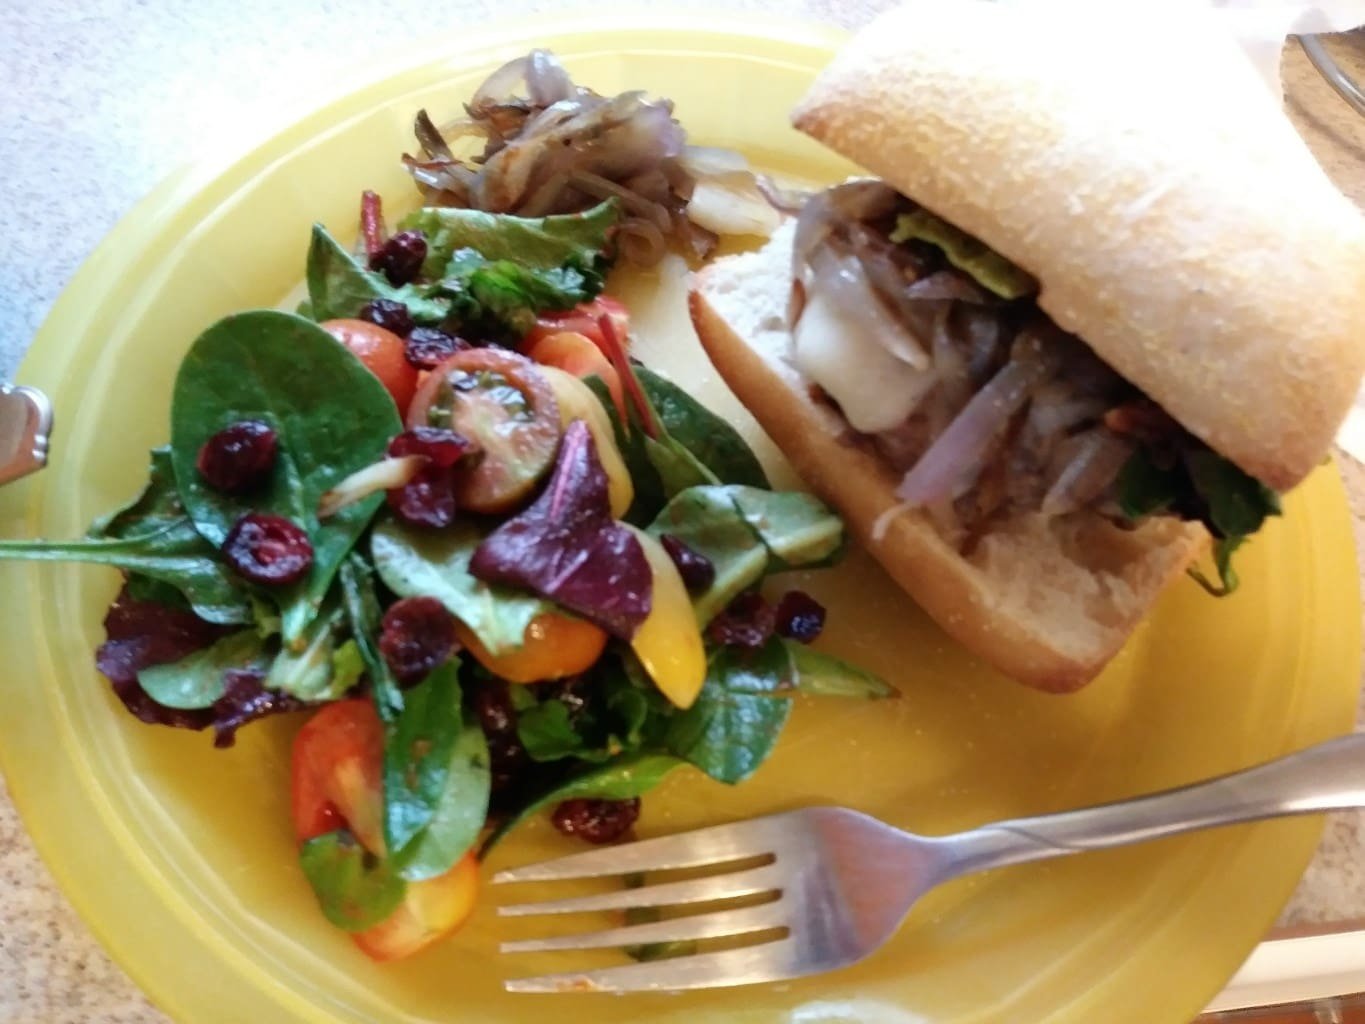 Melty Mozzarella Burgers with Caramelized Onion and Balsamic Greens on Ciabatta